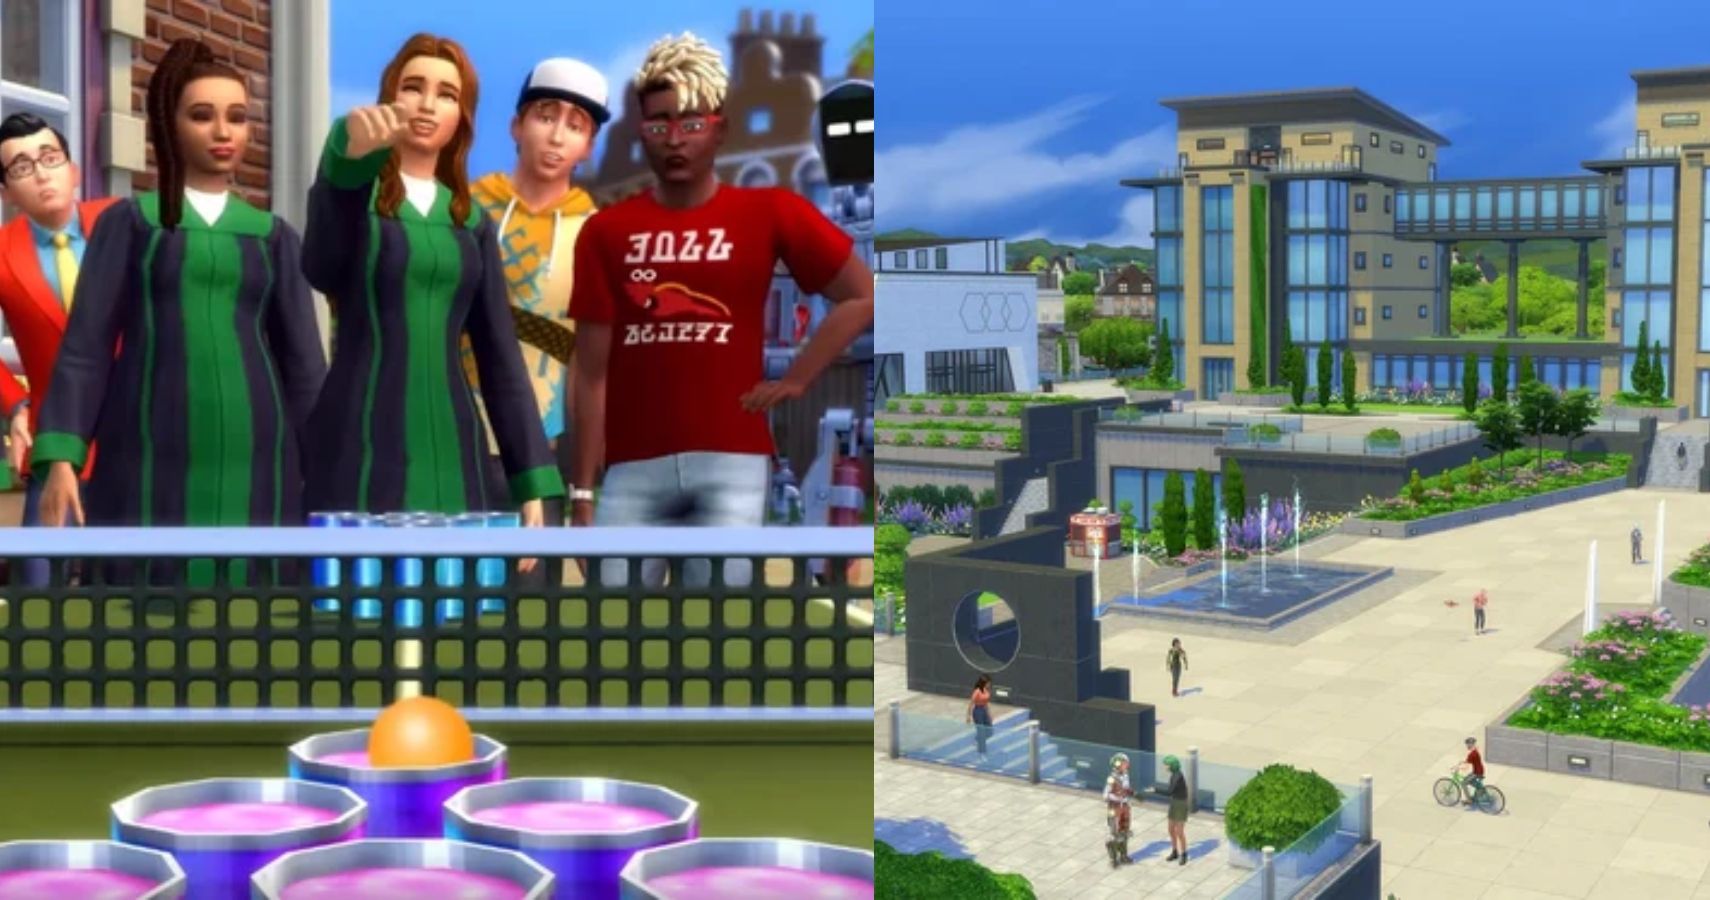 The Sims 4 - Discover University at the best price